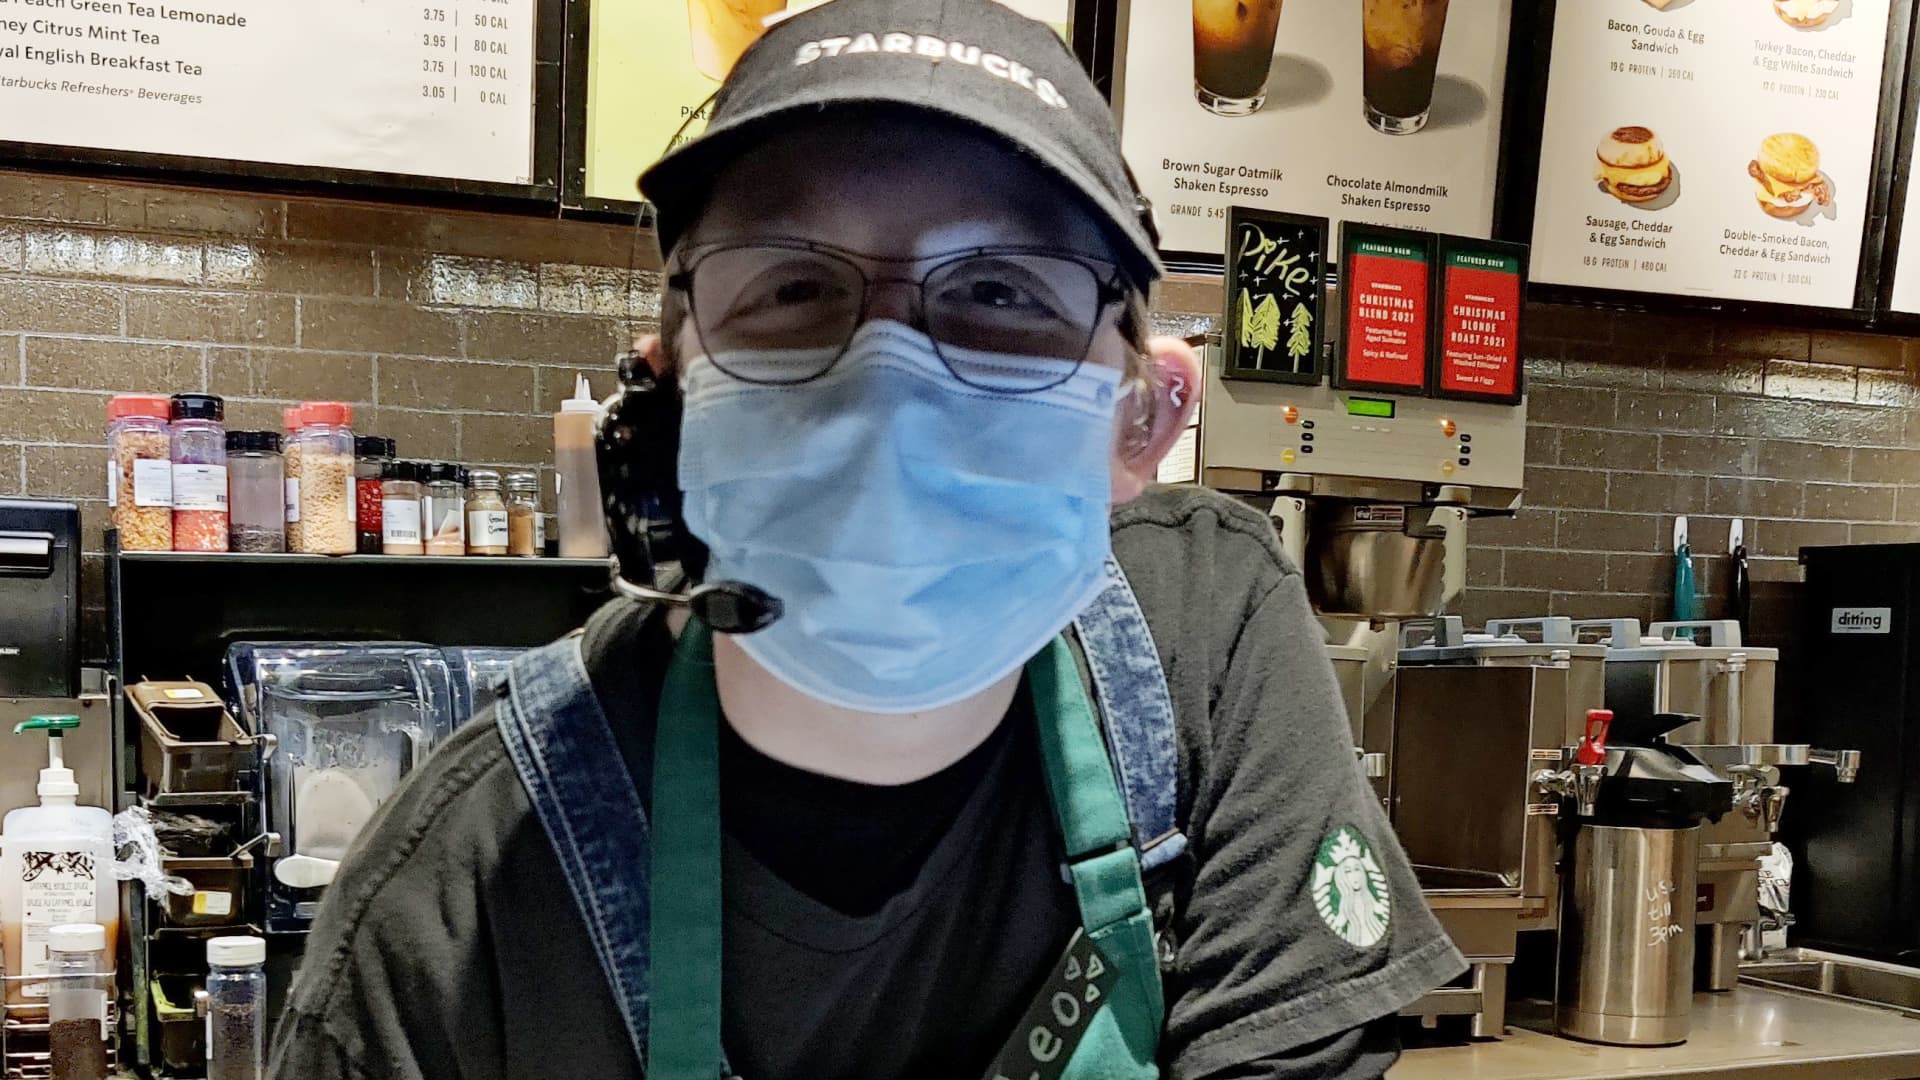 Leo Hernandez is a shift supervisor at Starbucks in Tallahassee, Florida, and supports the store unionizing.